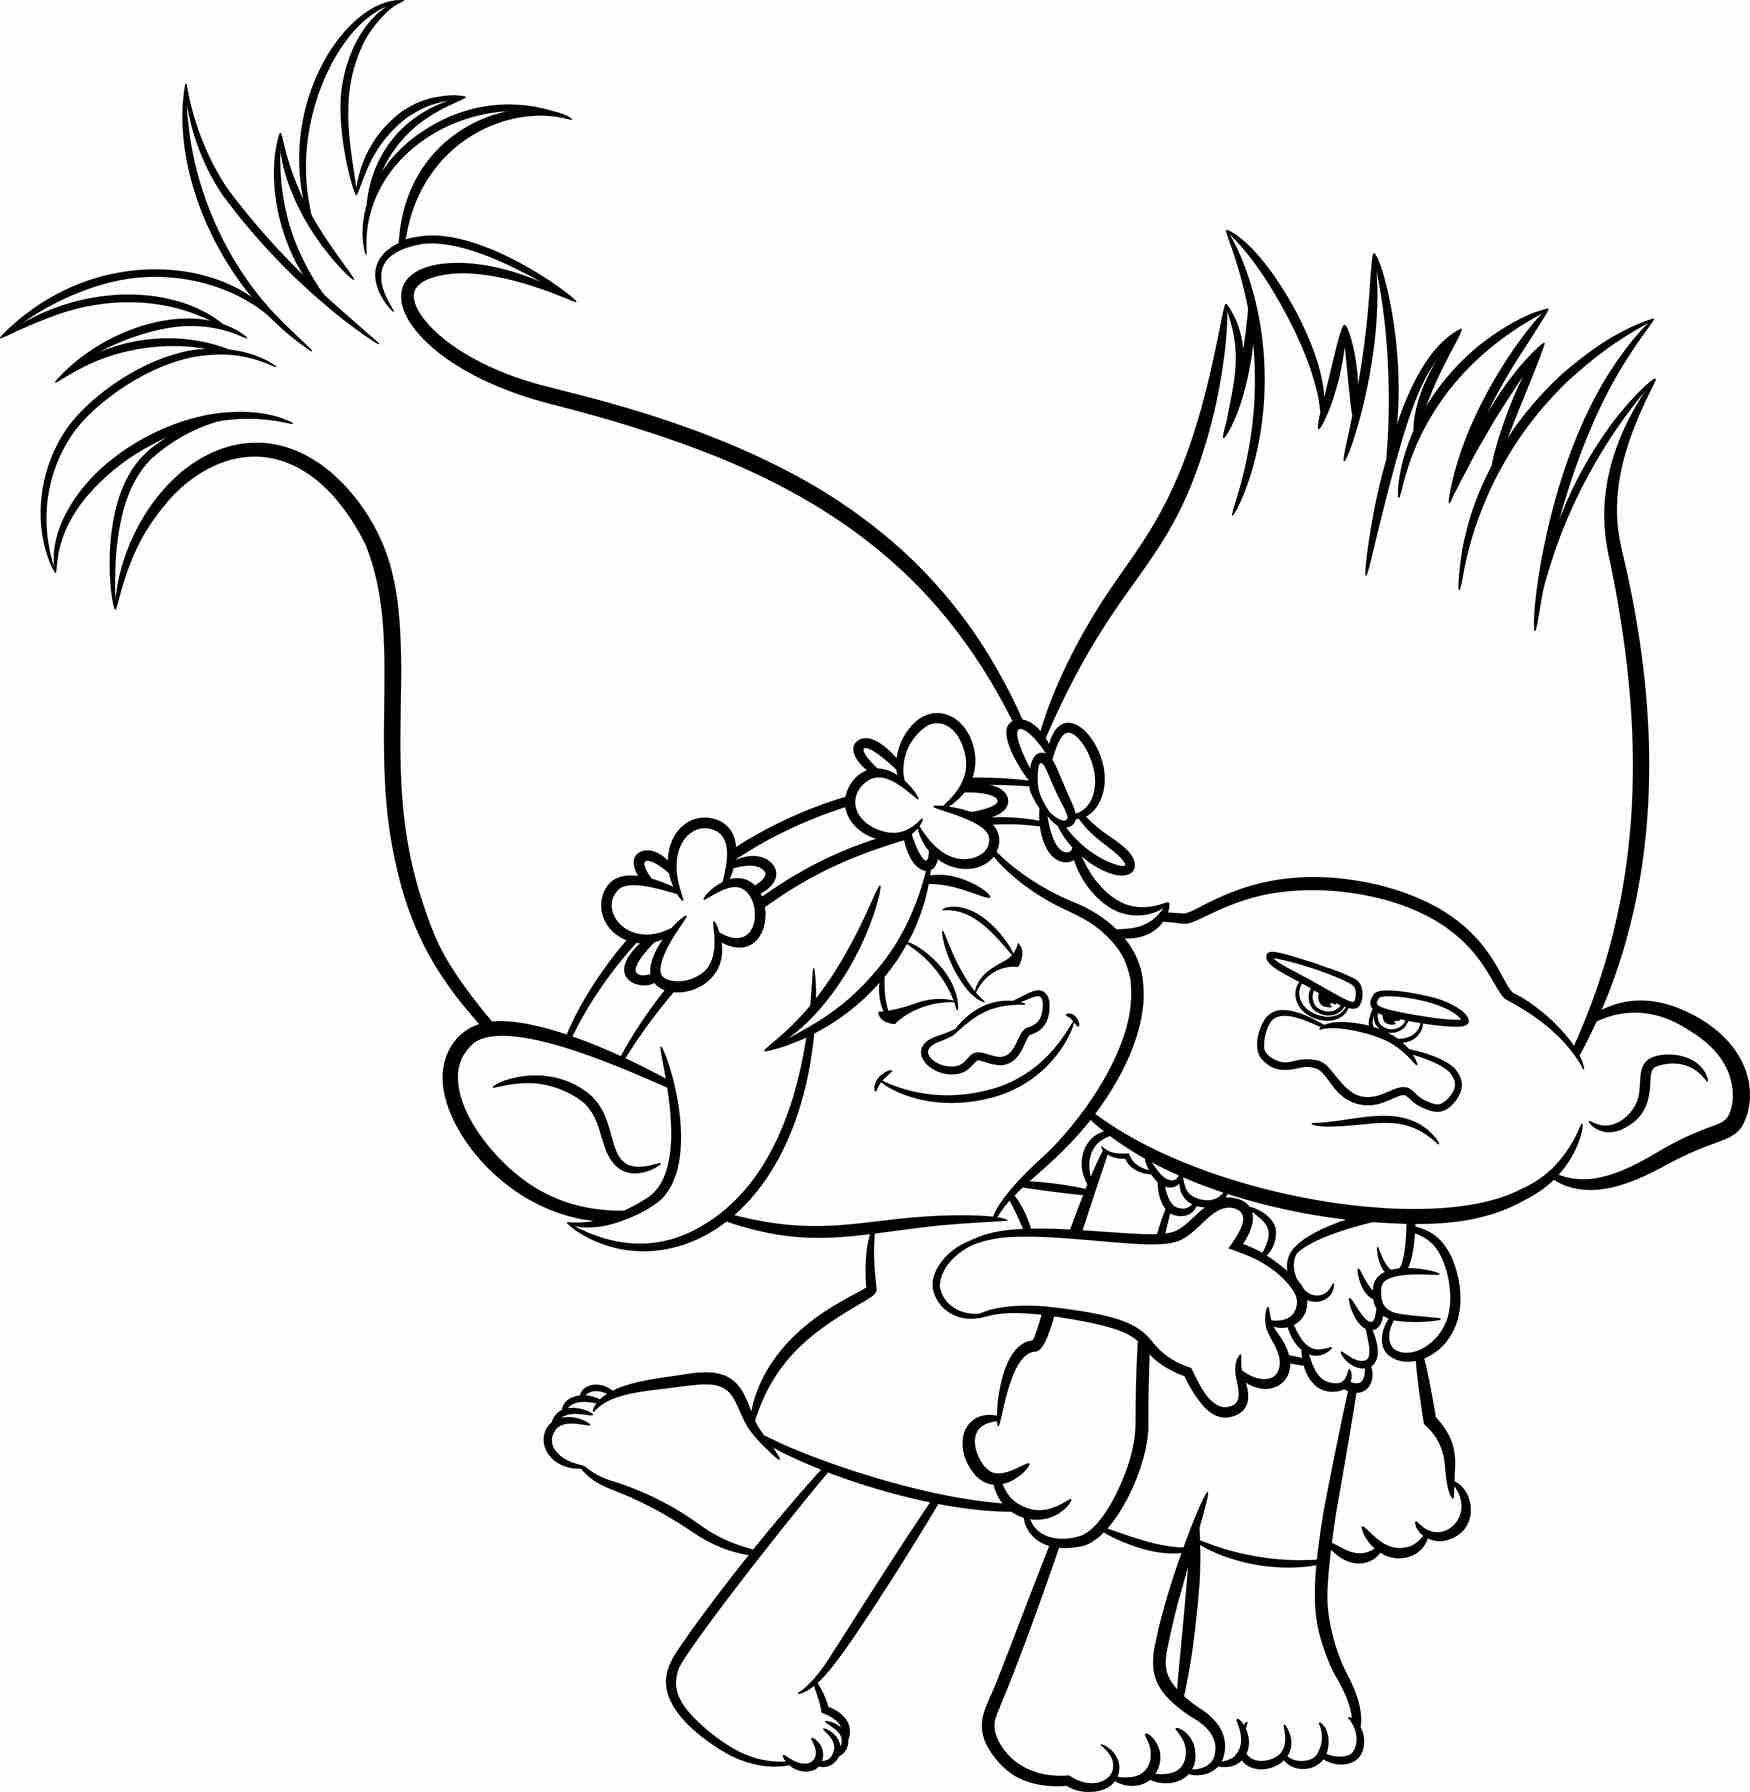 Trolls Free Coloring Pages At Getdrawings | Free Download